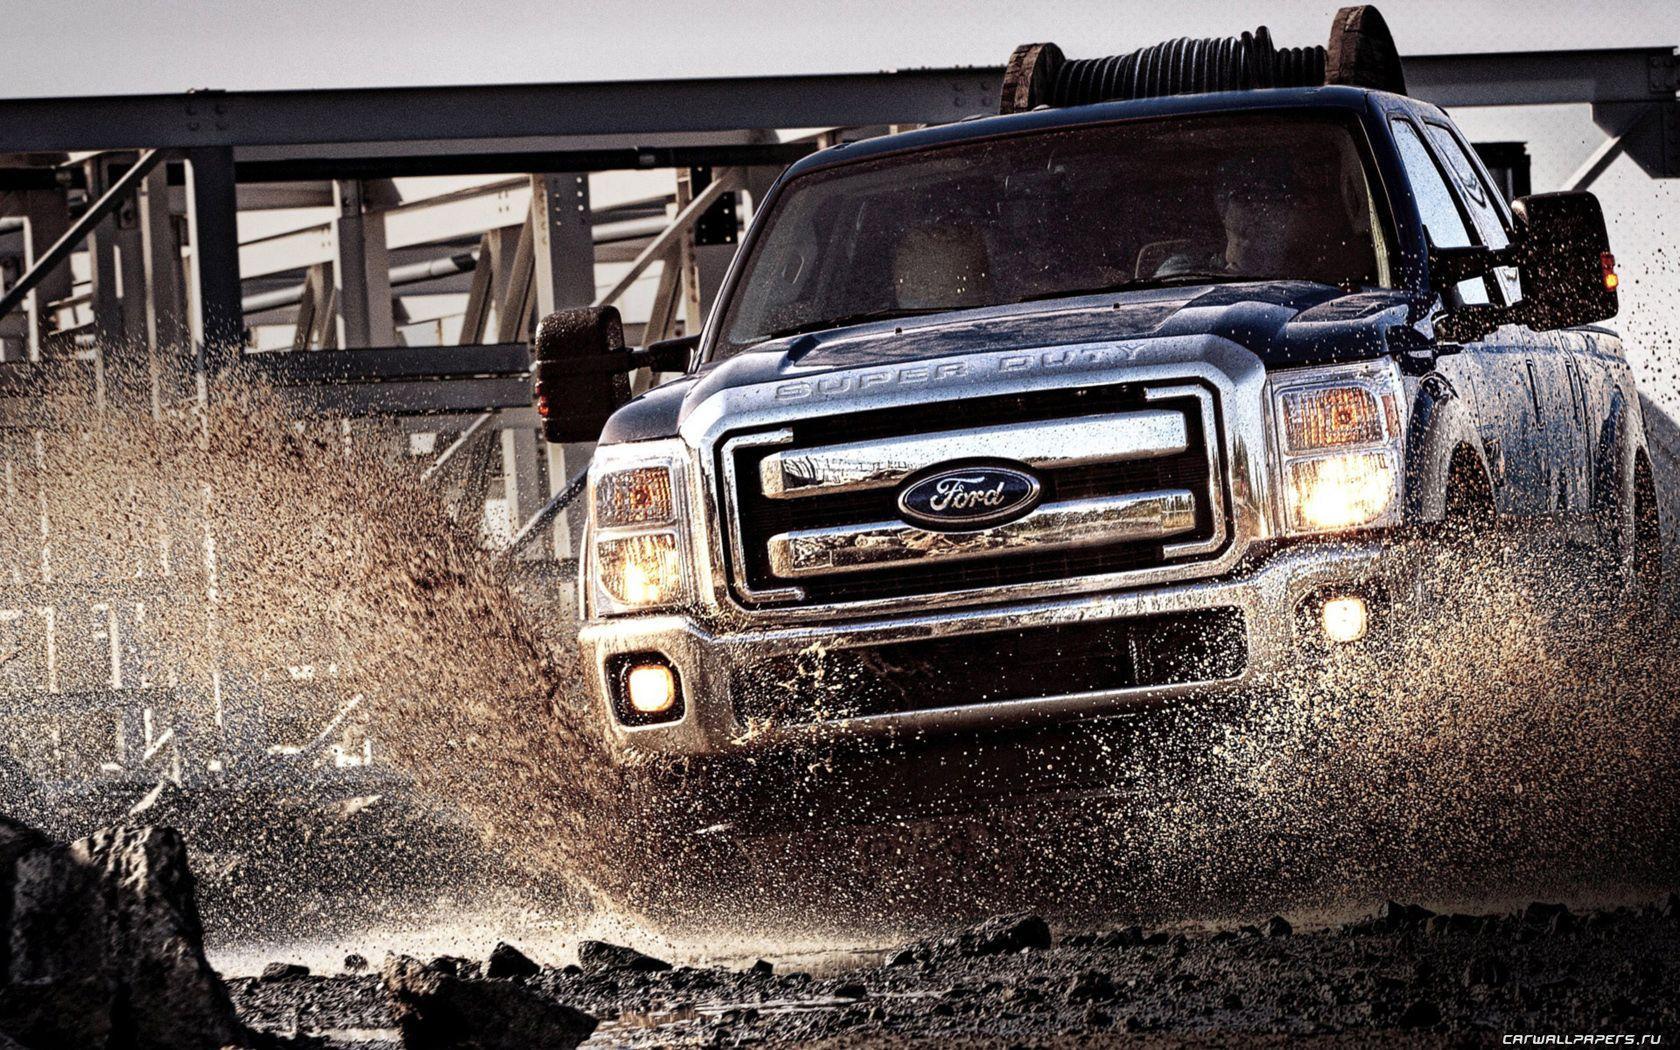 Ford F350 Wallpapers Top Free Ford F350 Backgrounds Wallpaperaccess